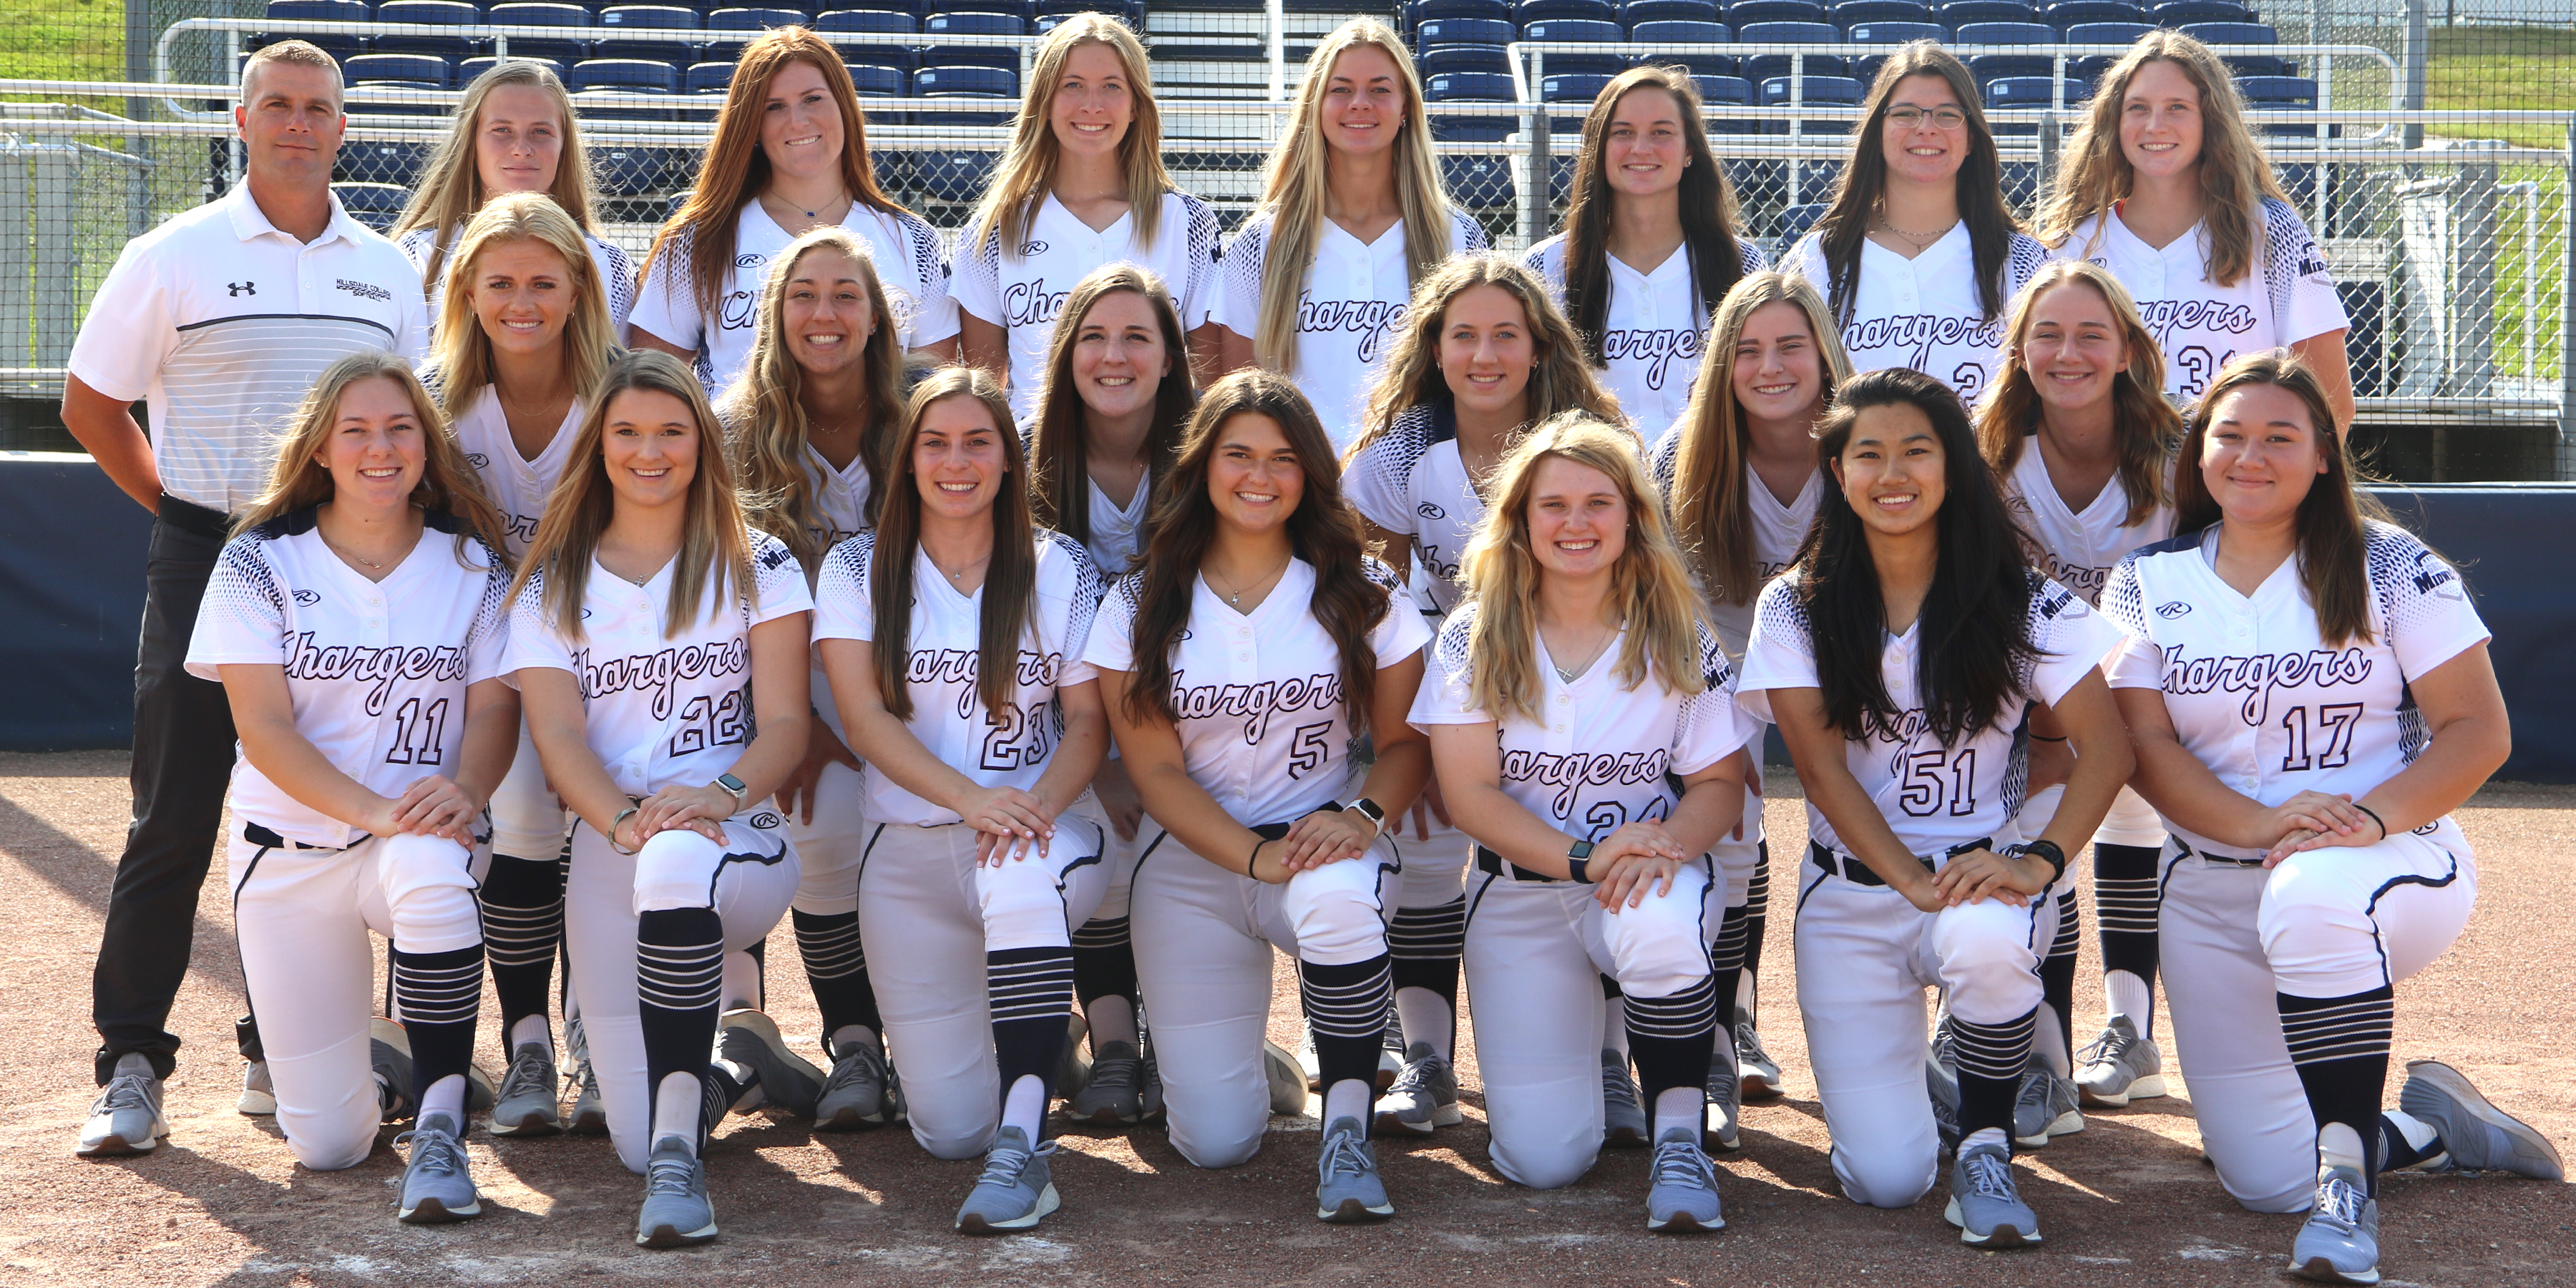 Chargers softball team to host second annual euchre tournament, seeks to fund trips